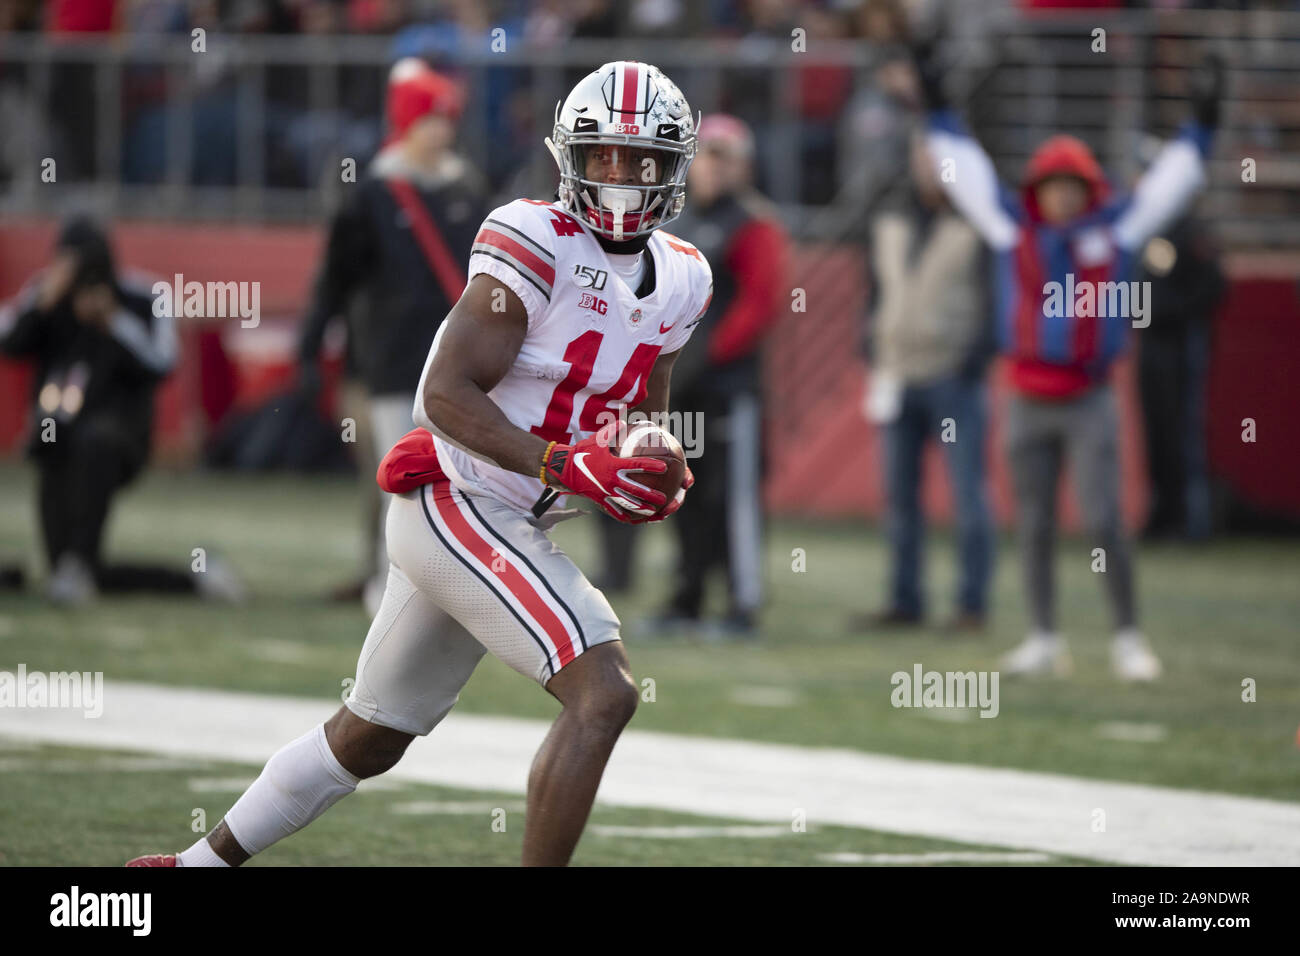 Piscataway, New Jersey, USA. 16th Nov, 2019. Ohio State's KJ HILL scores a  touch down during game action against Rutgers University at SHI Stadium in  Piscataway, New Jersey. Ohio State defeated Rutgers